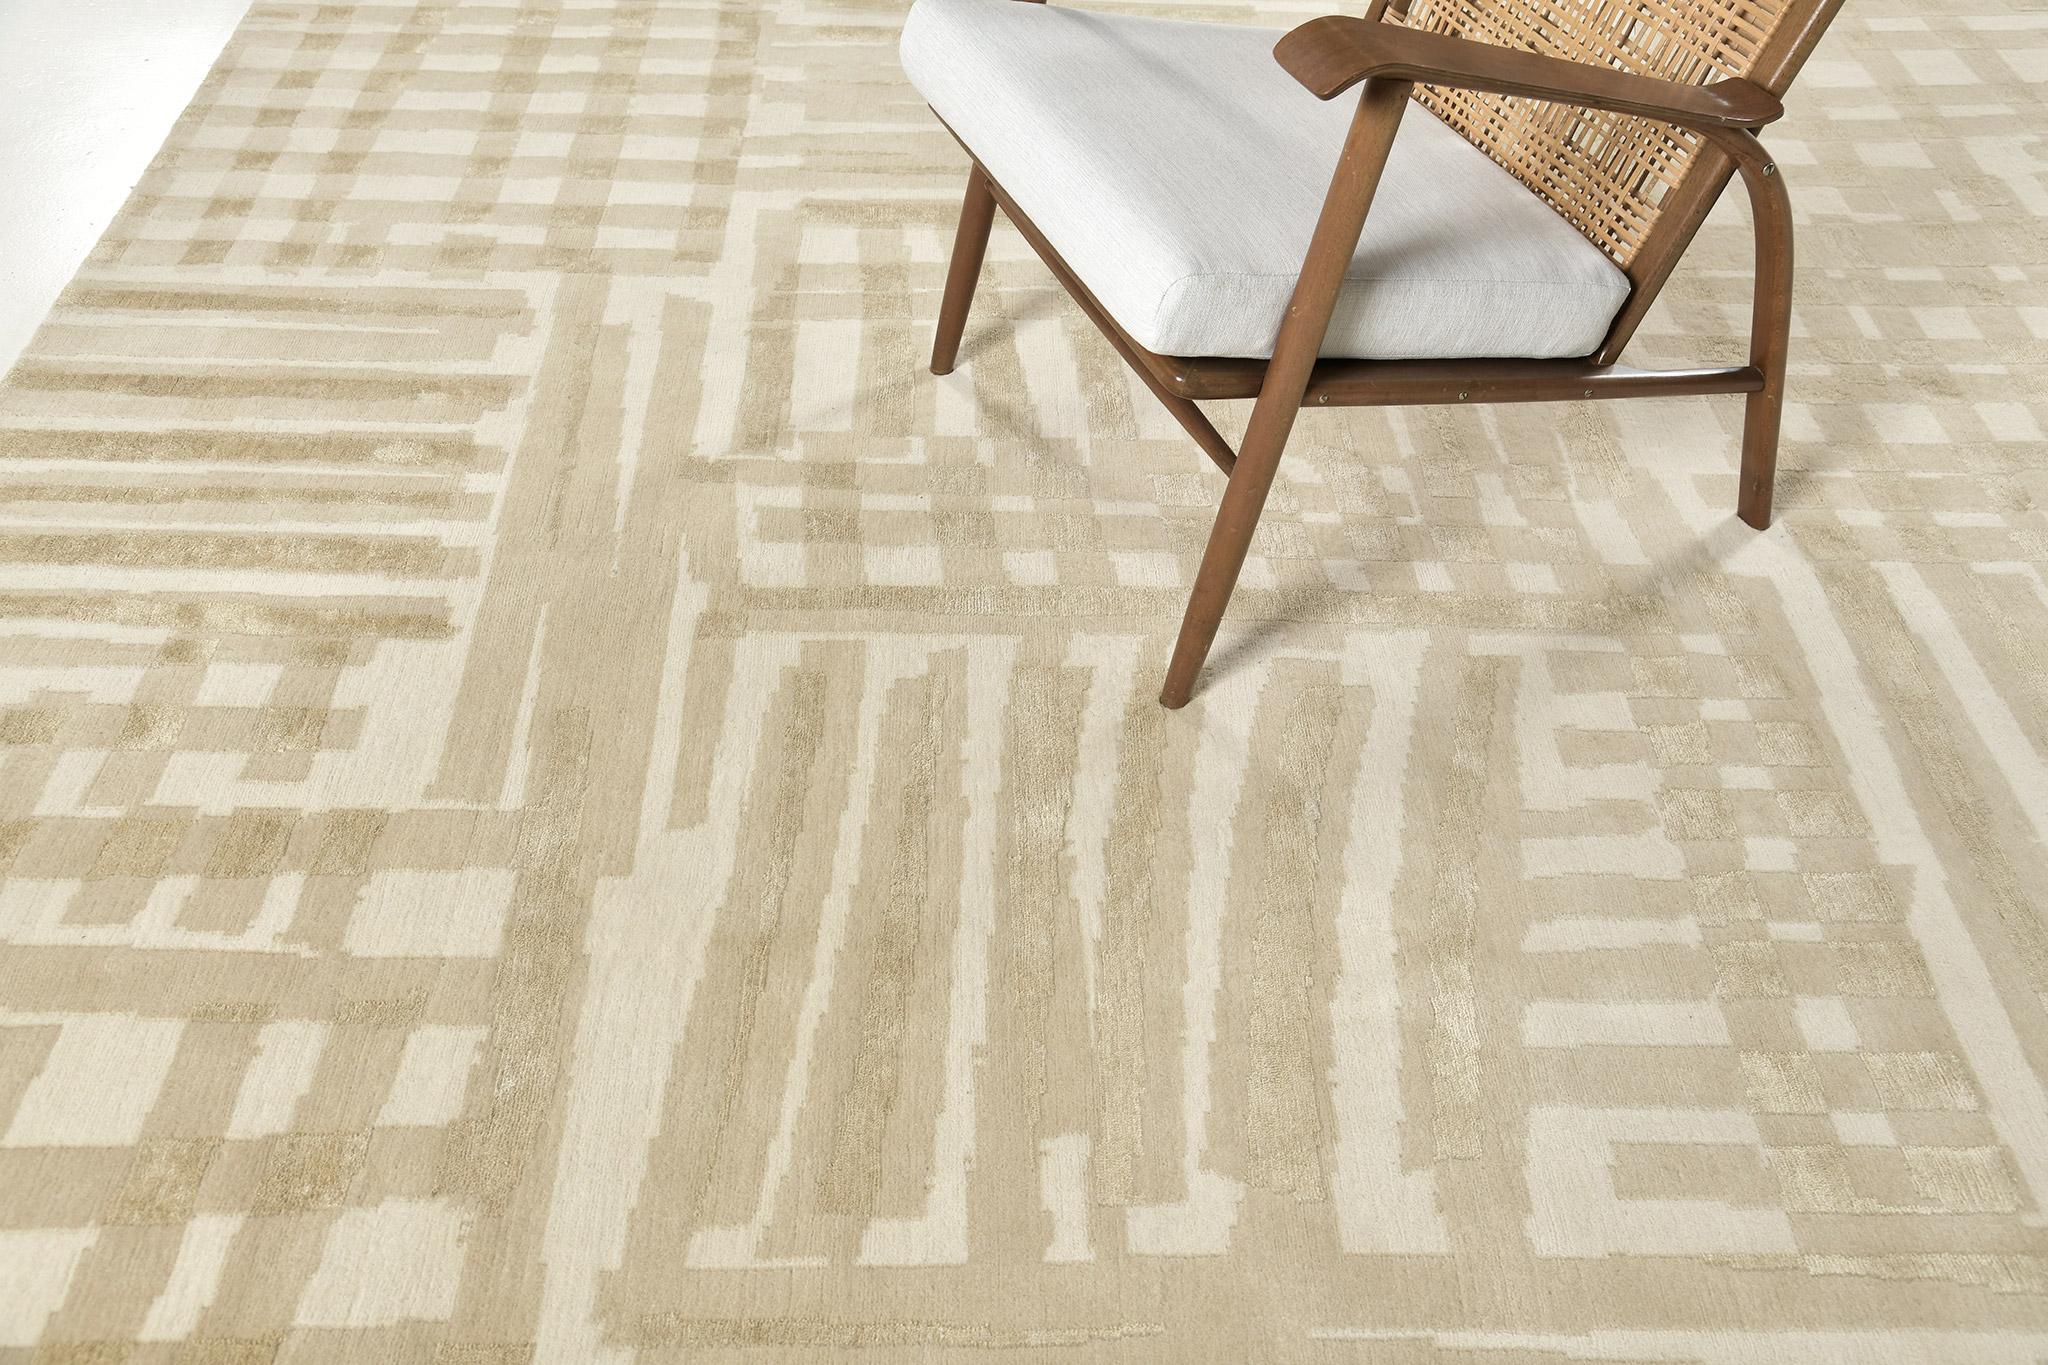 Due Volte is neutral-toned wool and silk that is inspired by various aspects of architecture. Featuring all the varying degrees of linear patterns,  this stunning rug features a classy and sophisticated kind of decor. A timeless design that is